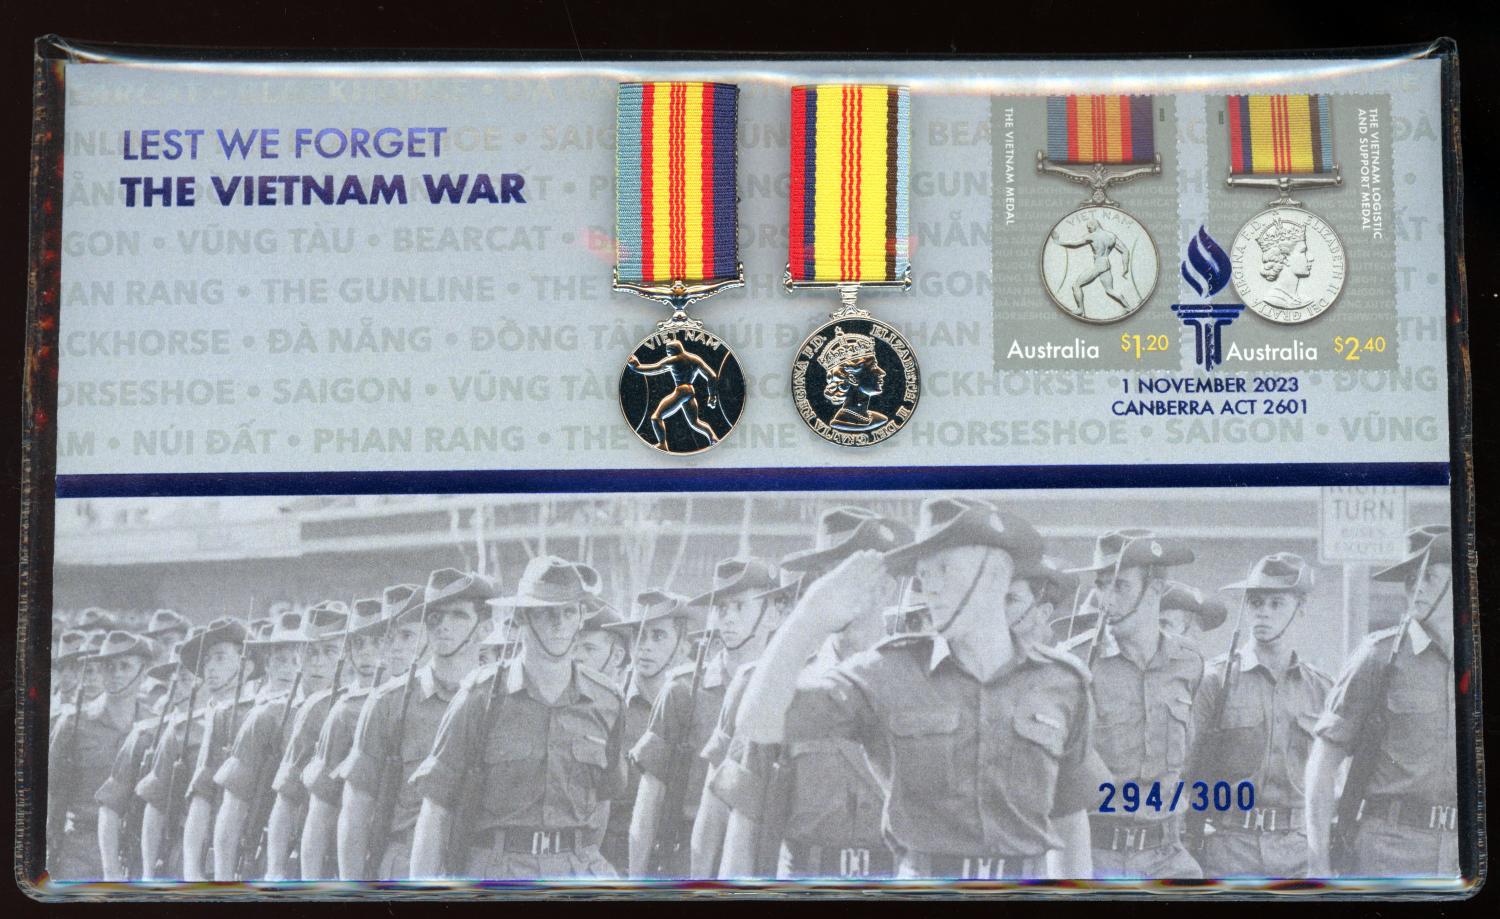 Thumbnail for 2023 Lest We Forget The Vietnam War - Mini Replica Medal Prestige Cover - Impressions Release 294-300